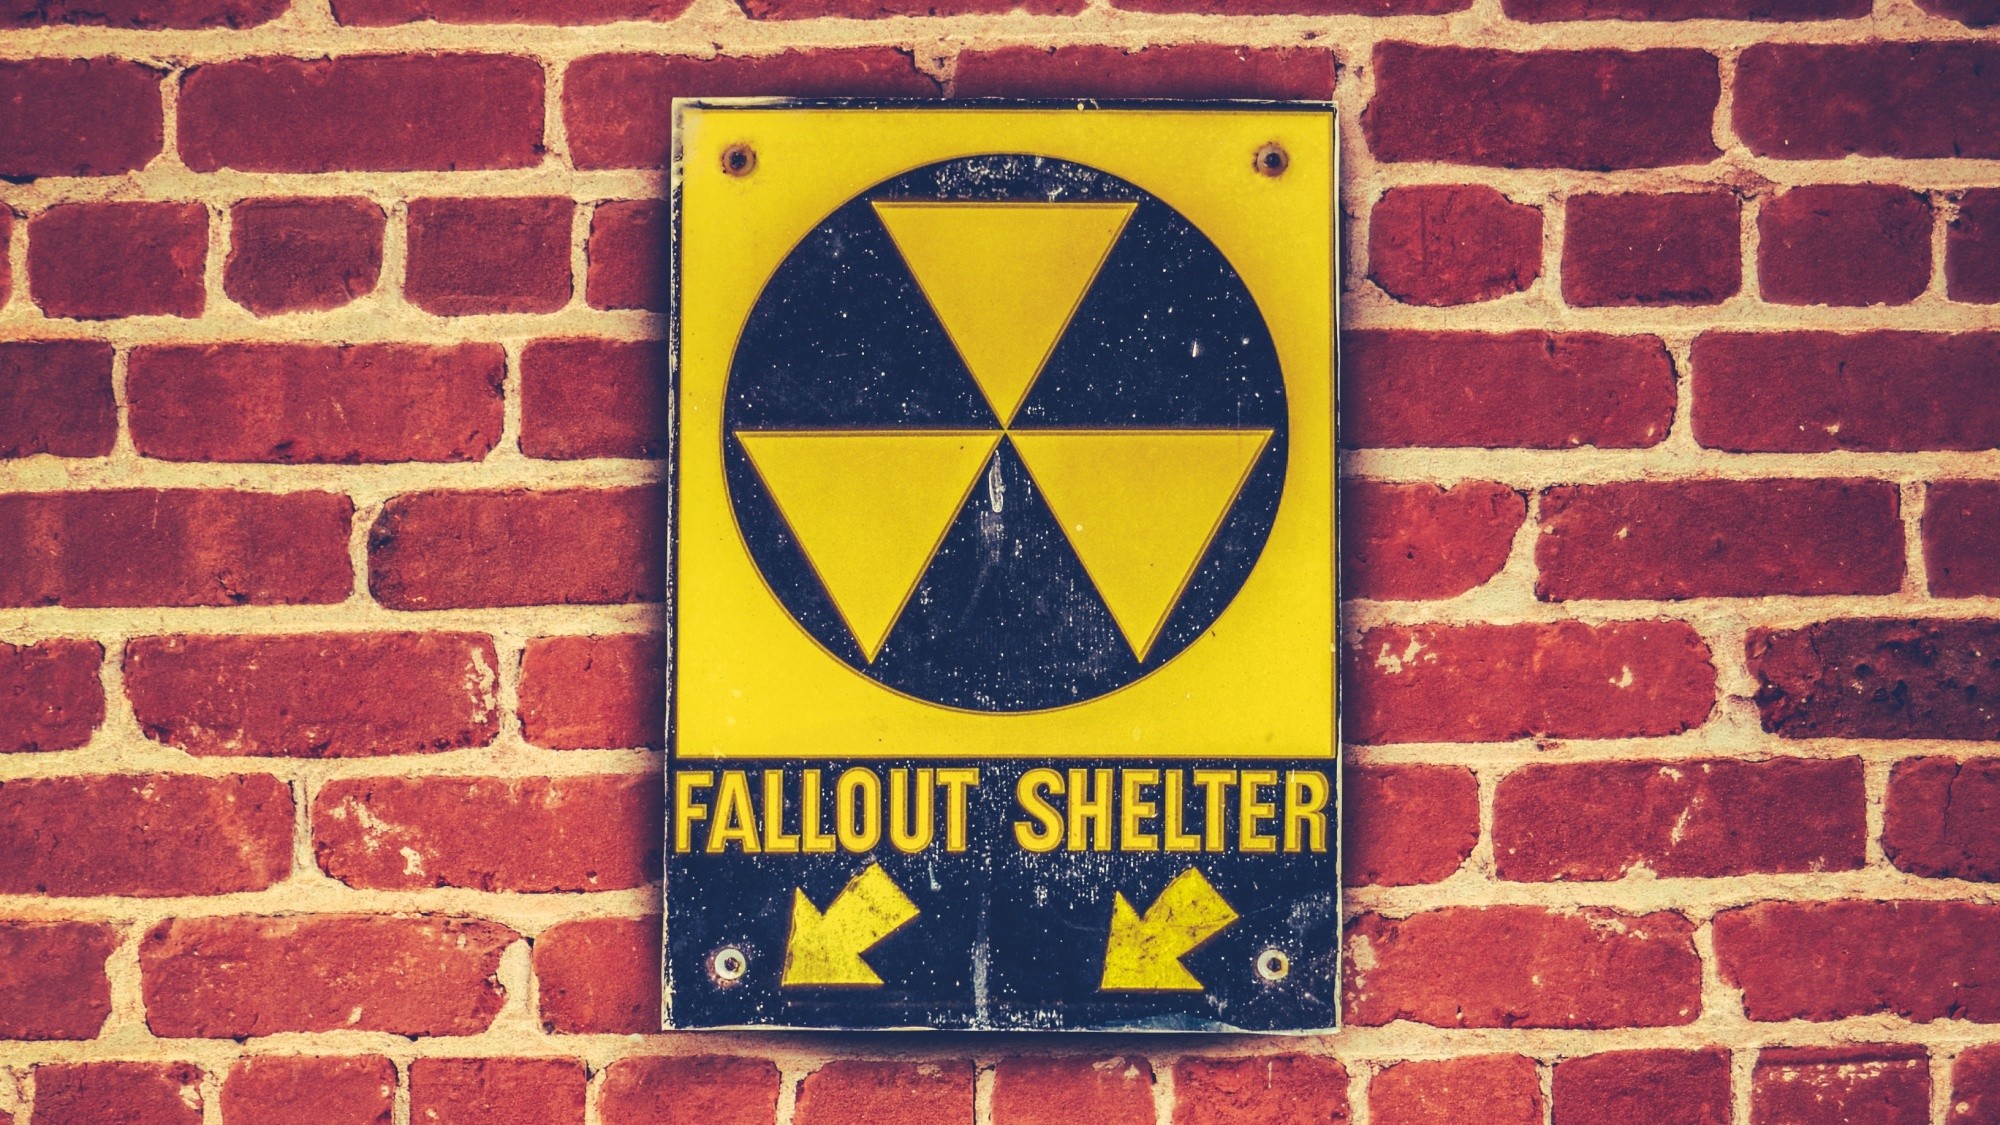 closest fallout shelter to me